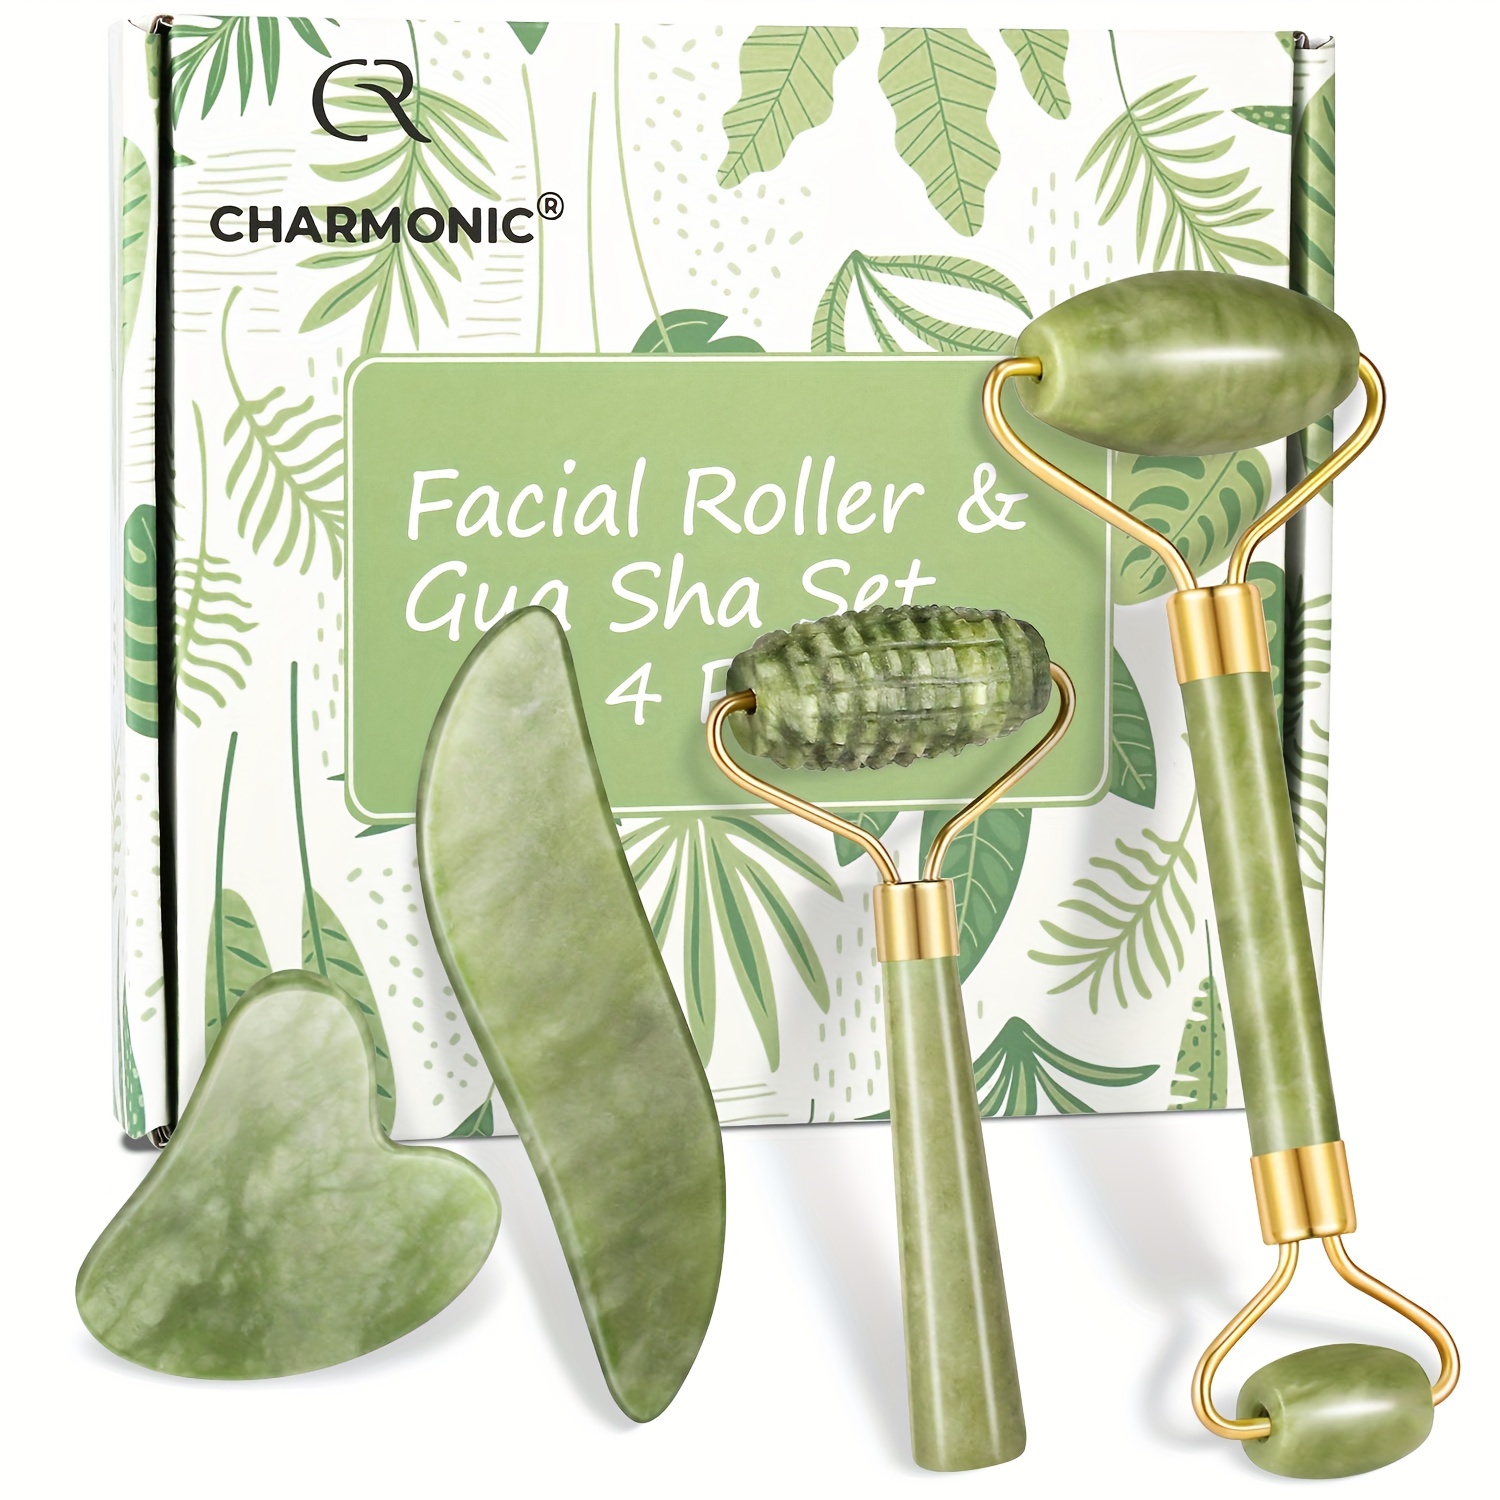 

4pcs Jade Roller & Gua Sha, Facial Roller Massager With Gua Sha Scraping Tool, Jade Stone Massager For Face And Neck - Mother's Day Gift - Facial Care Gifts For Mother